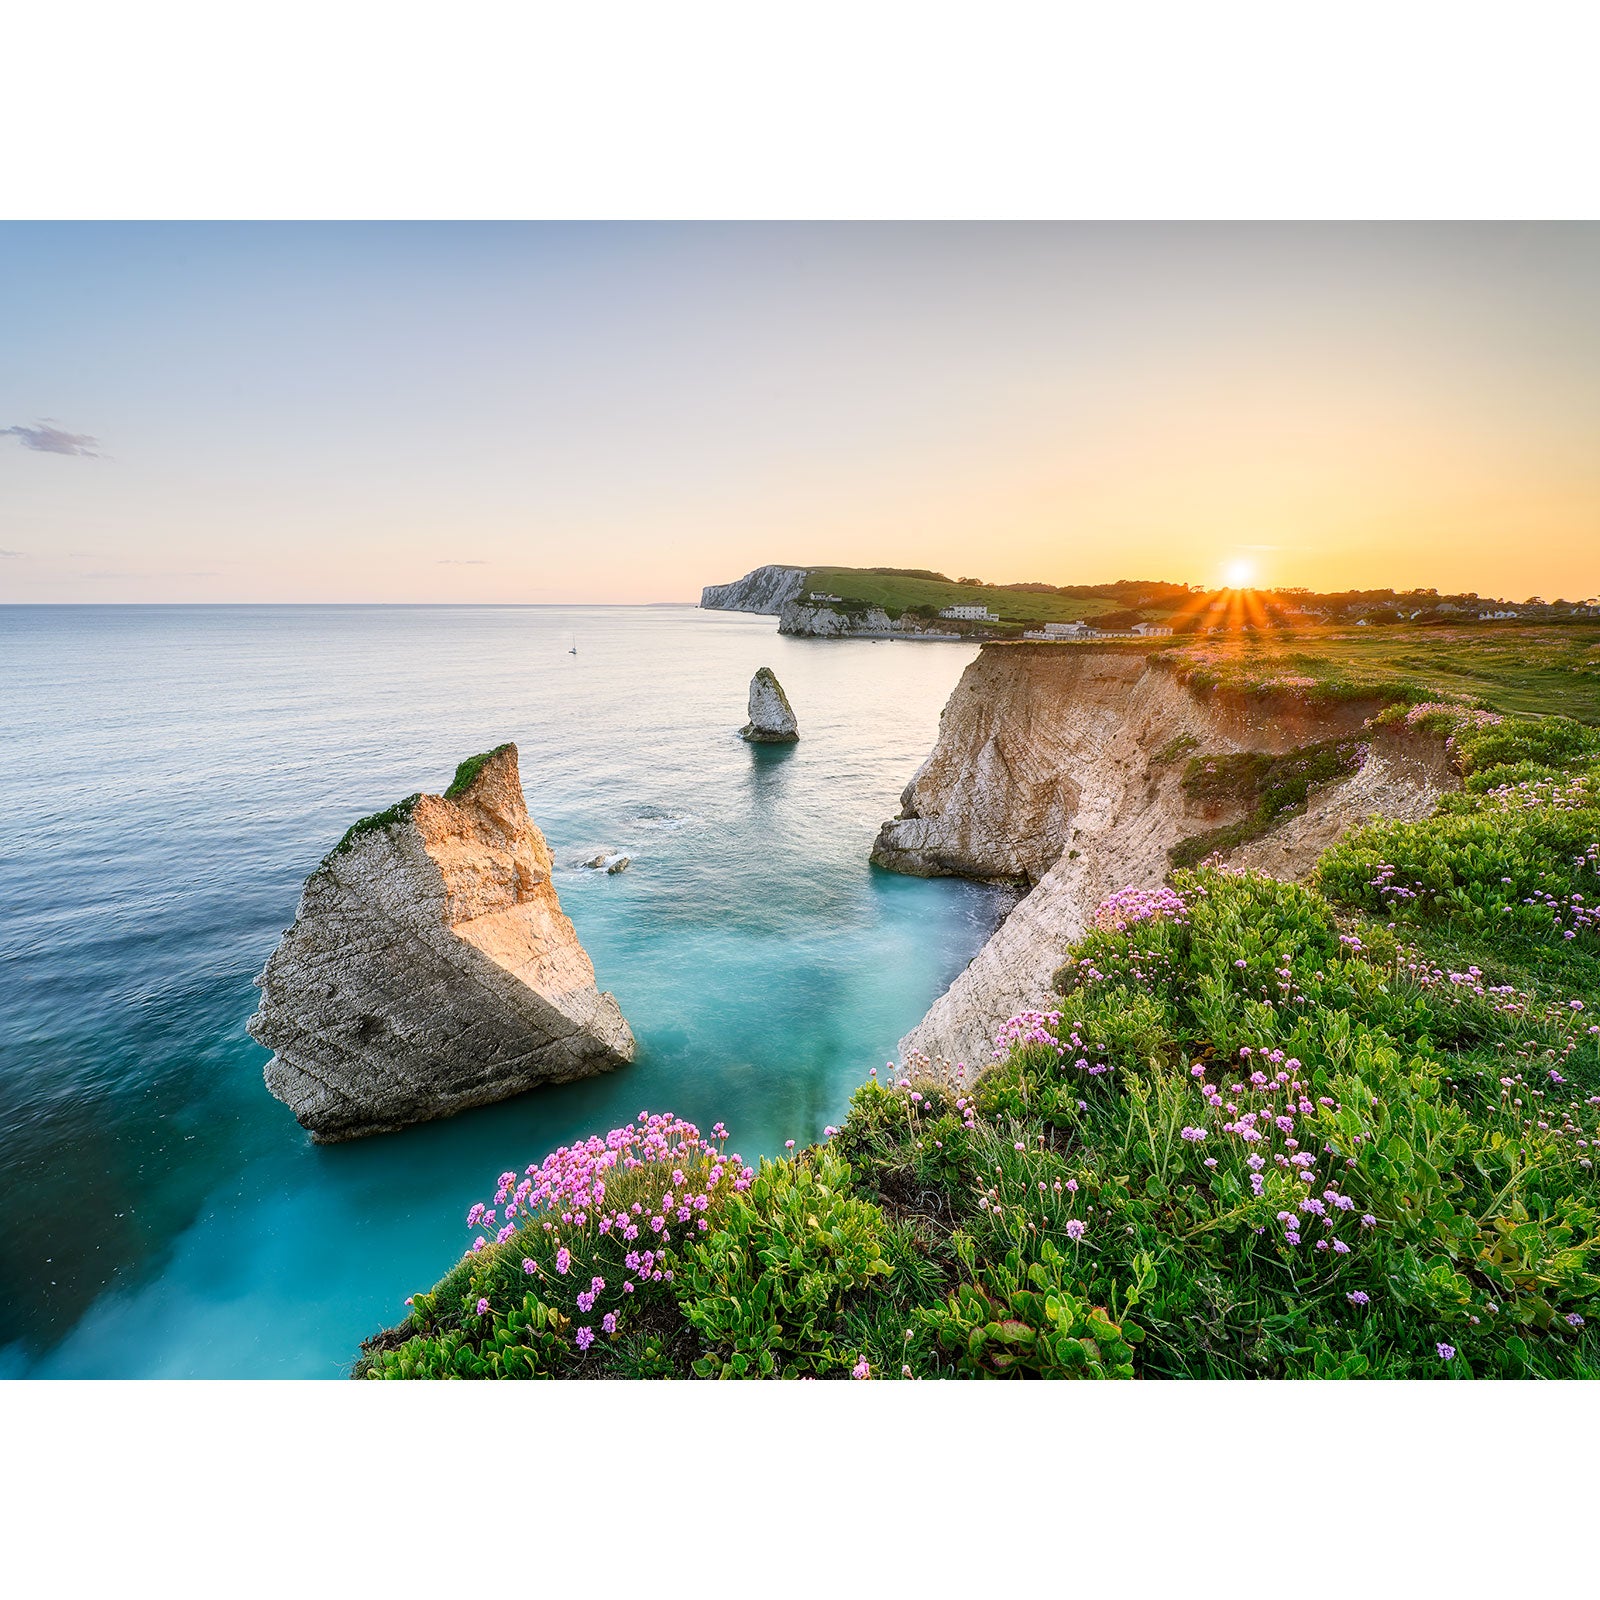 Sunset over a coastal landscape on the Isle of Wight with chalk cliffs and sea stacks, Pink Thrift in the foreground. (Freshwater Bay, Available Light Photography)